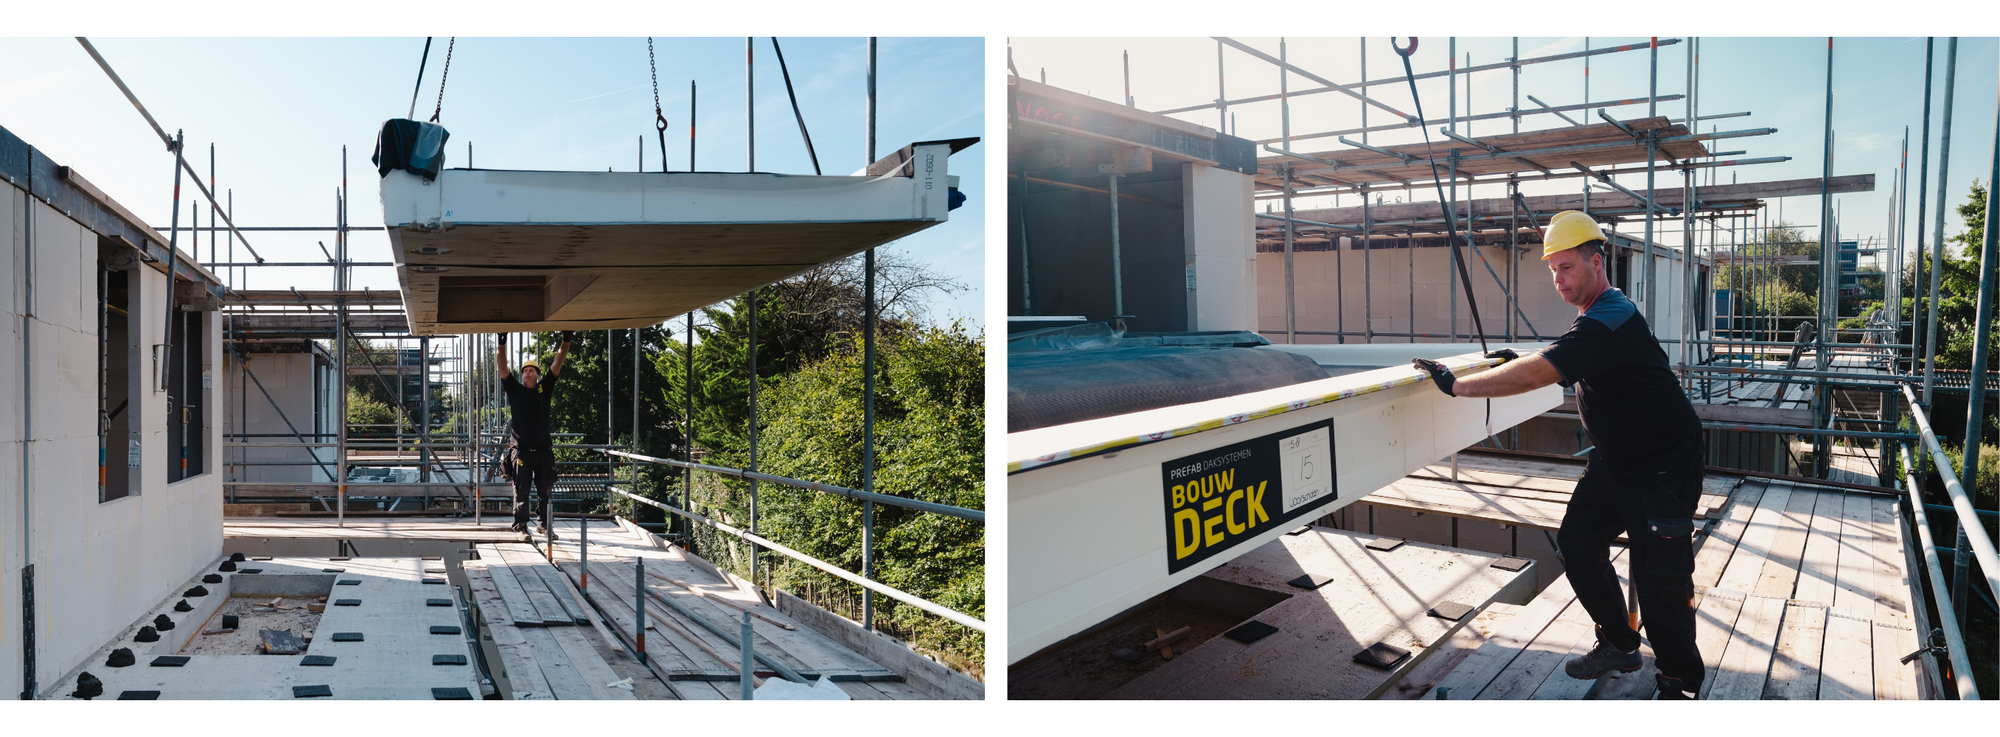 Photos of prefabricated roof elements from Bouwdeck being installed by a technician